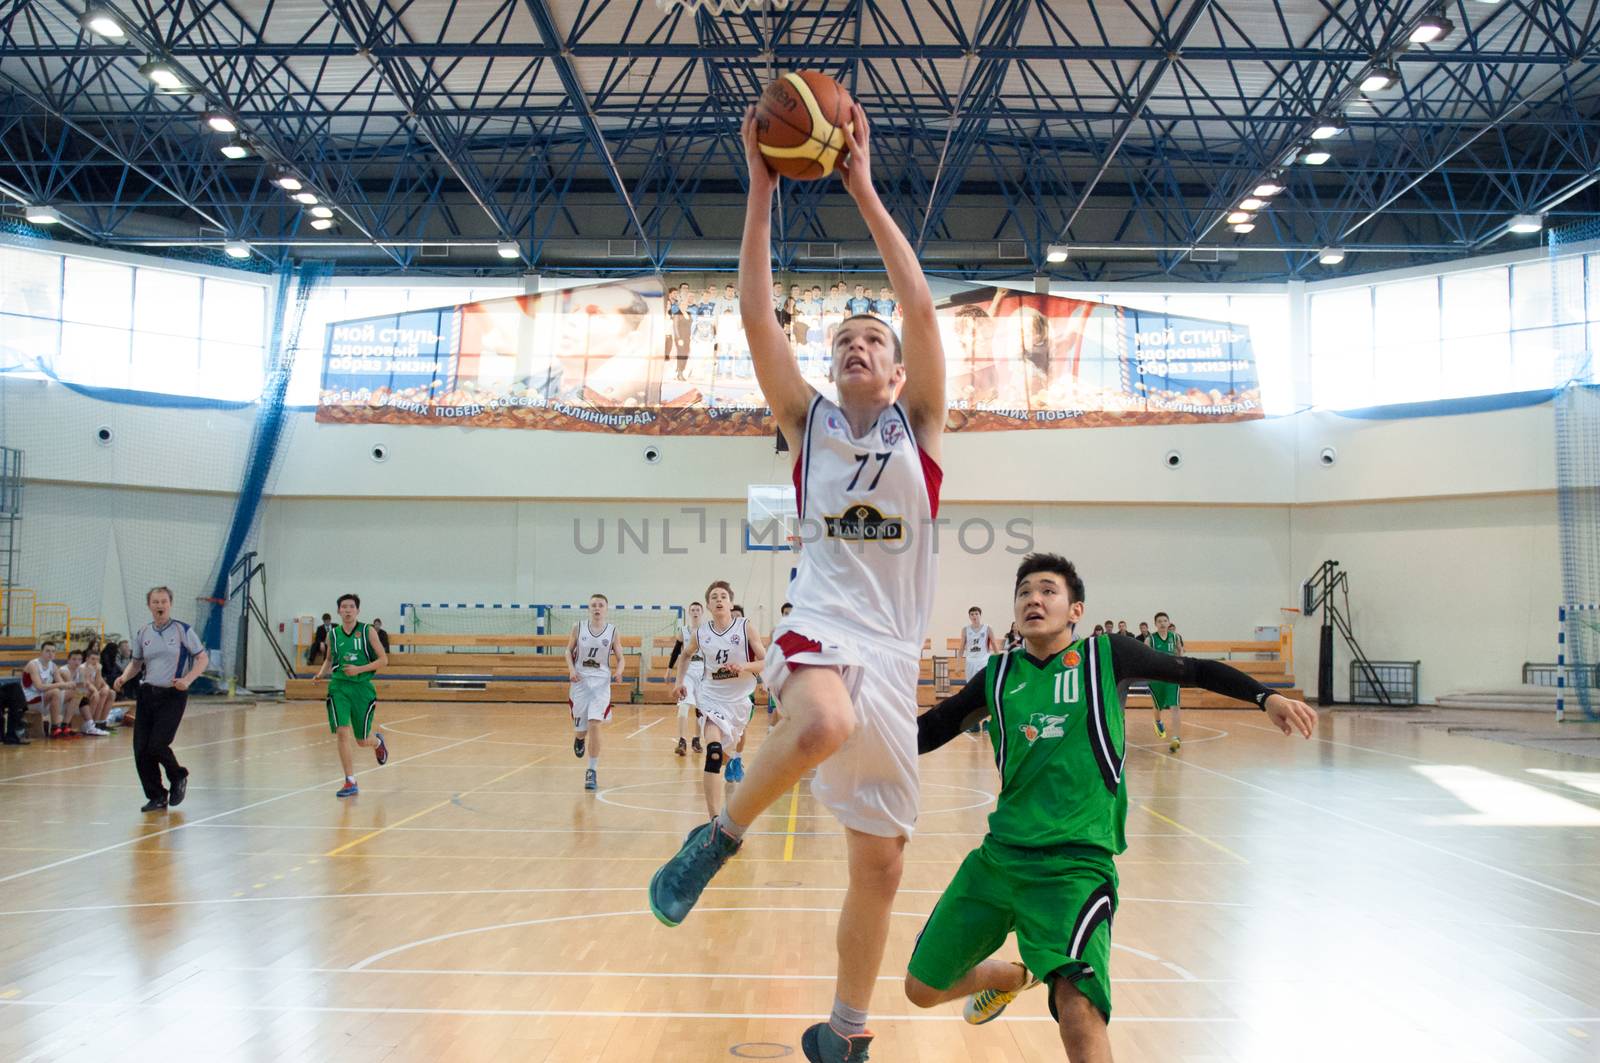 european youth basketball league by rook